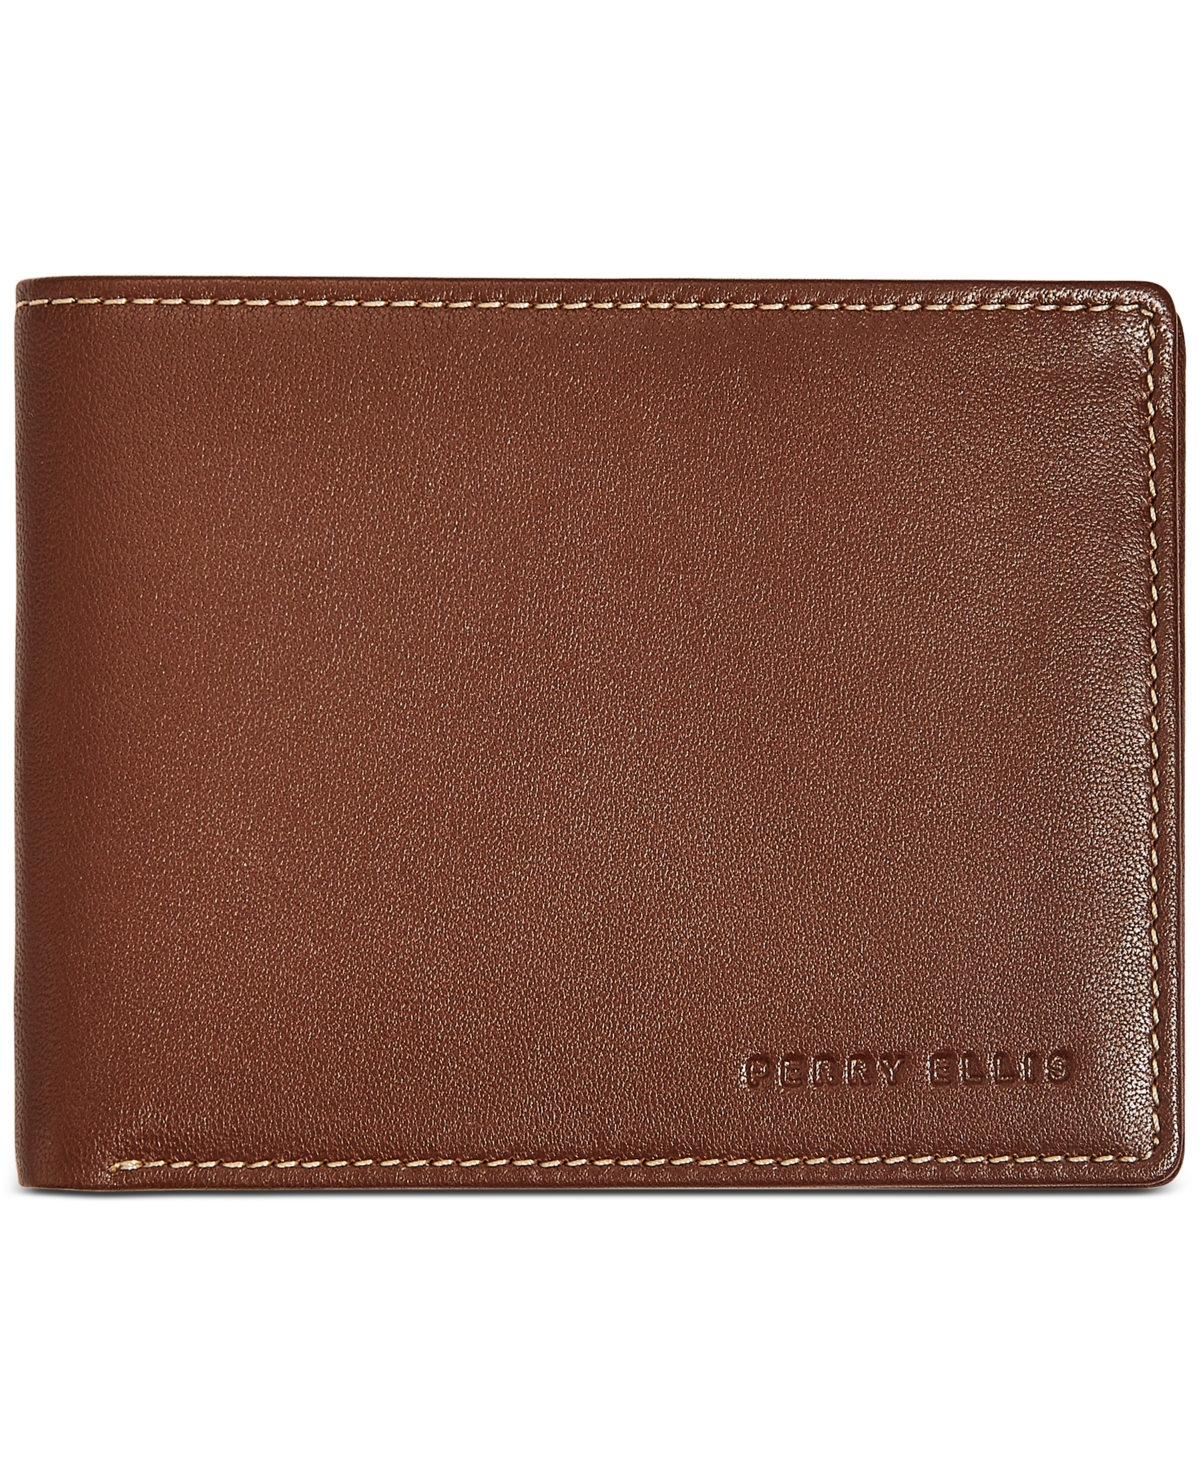 Perry Ellis Men's Leather Wallet - Luggage